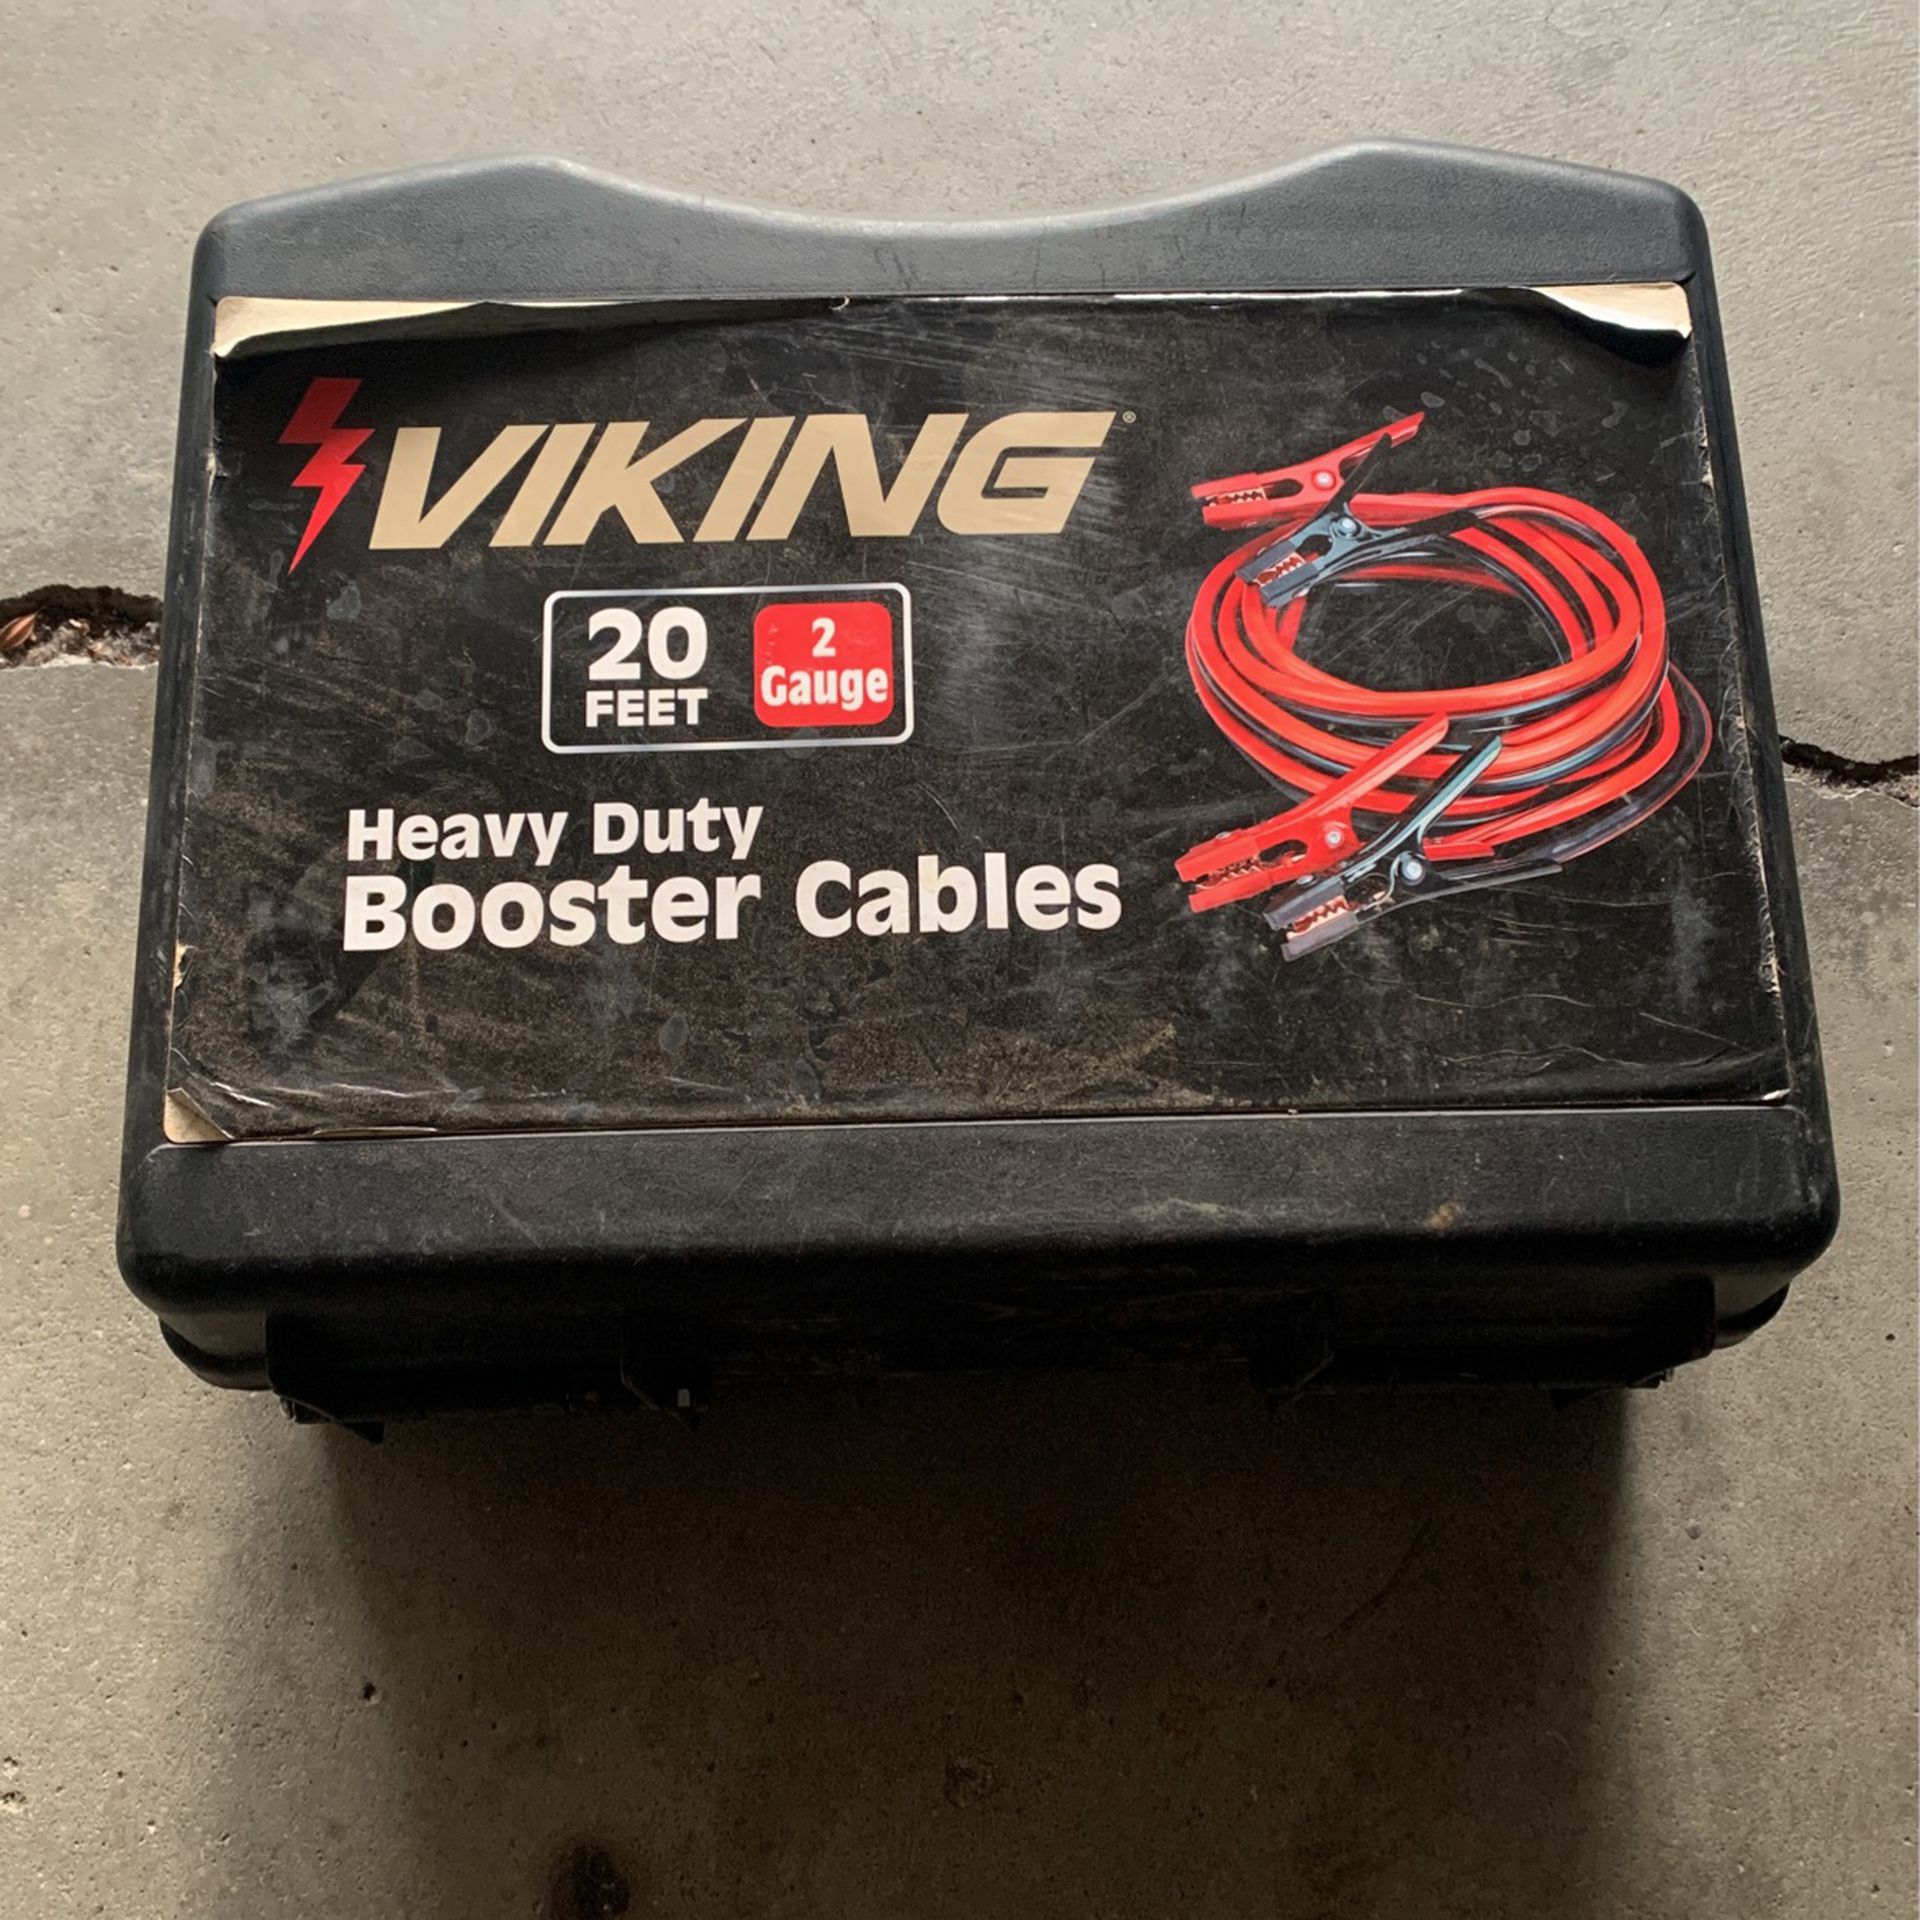 Viking Heavy Duty Booster Cables